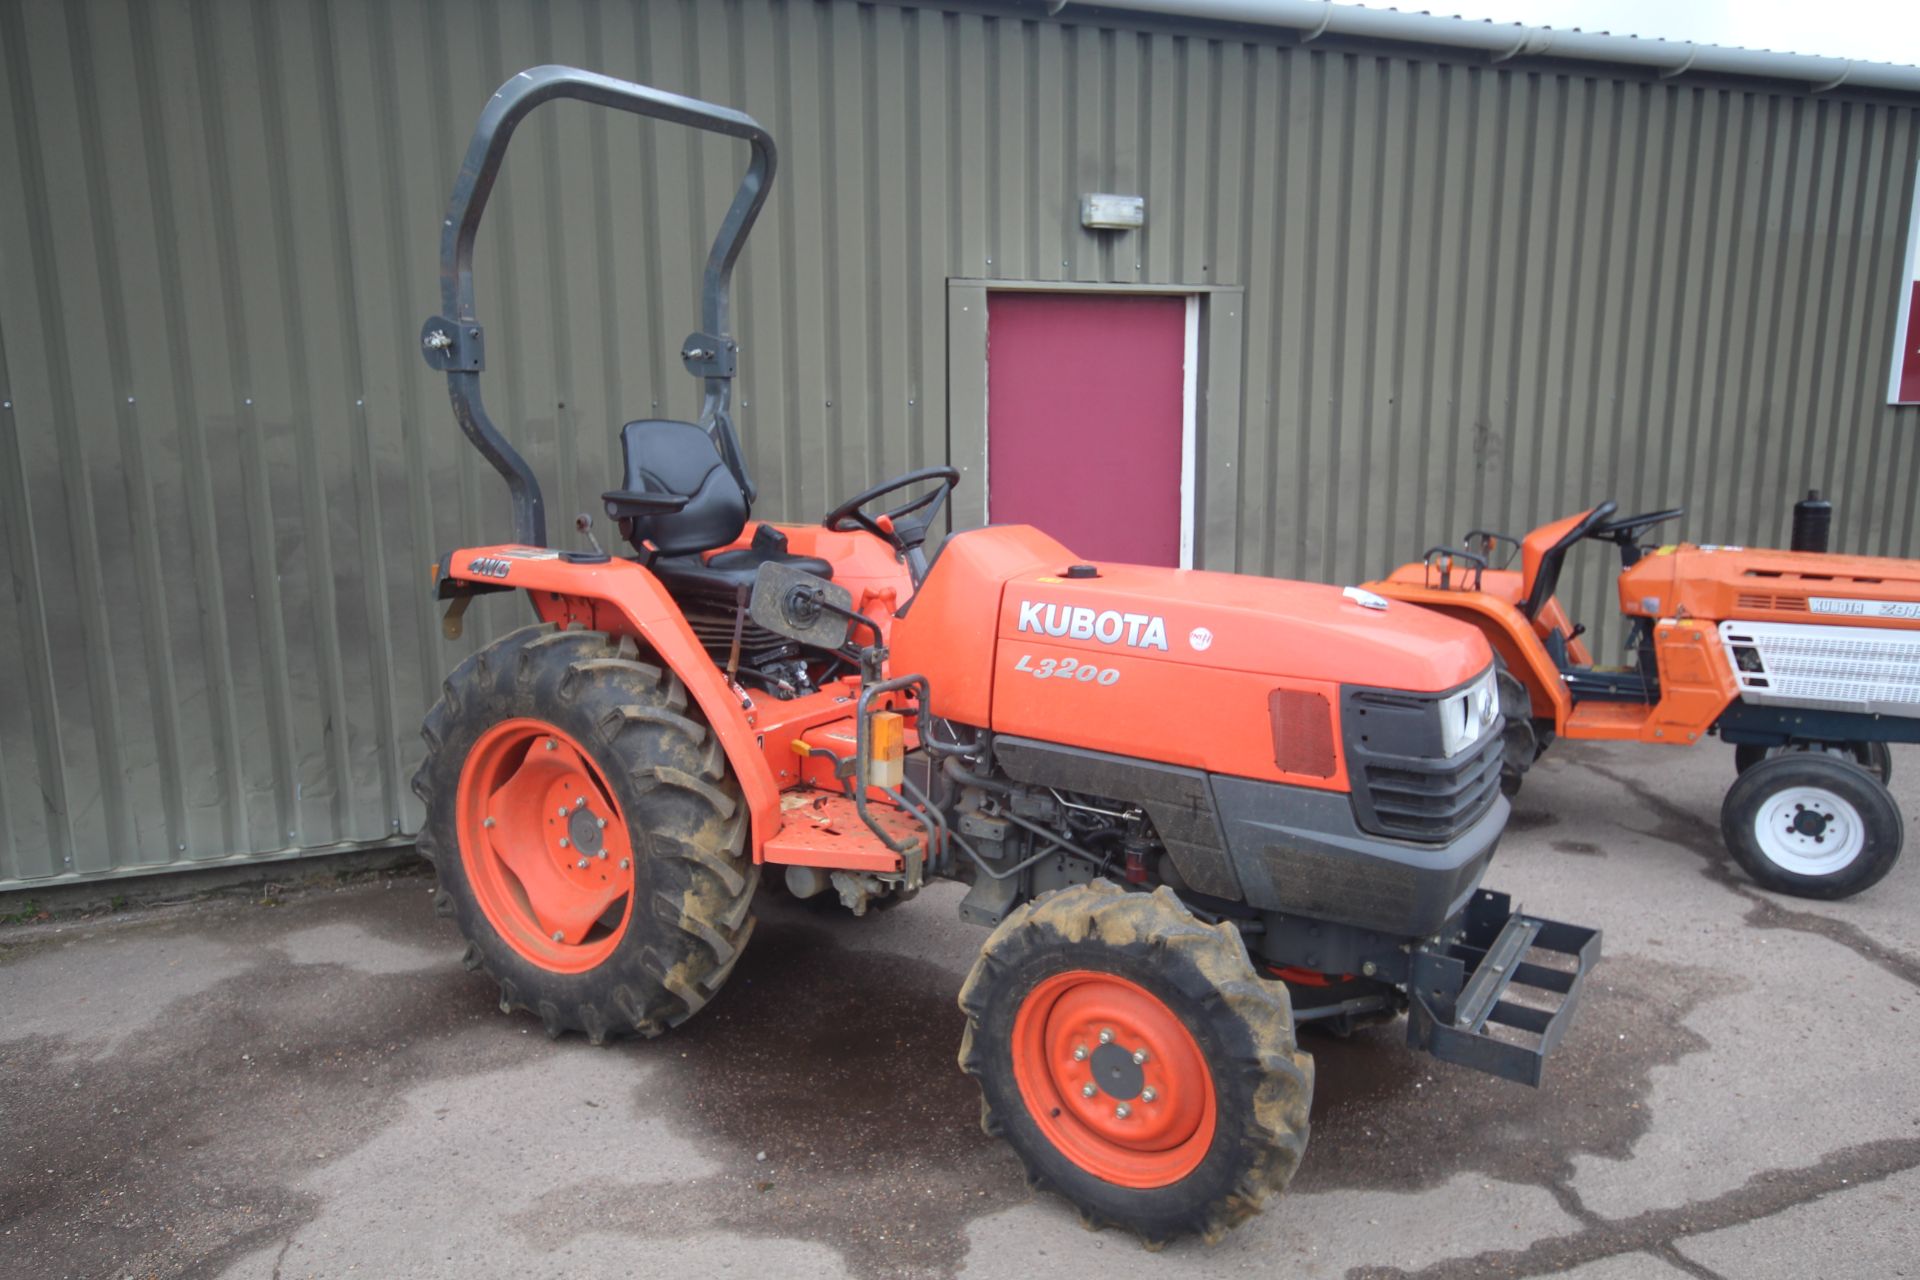 Kubota L3200 4WD compact tractor. Registration AY15 CYZ. Date of first registration xx/xx/2015.